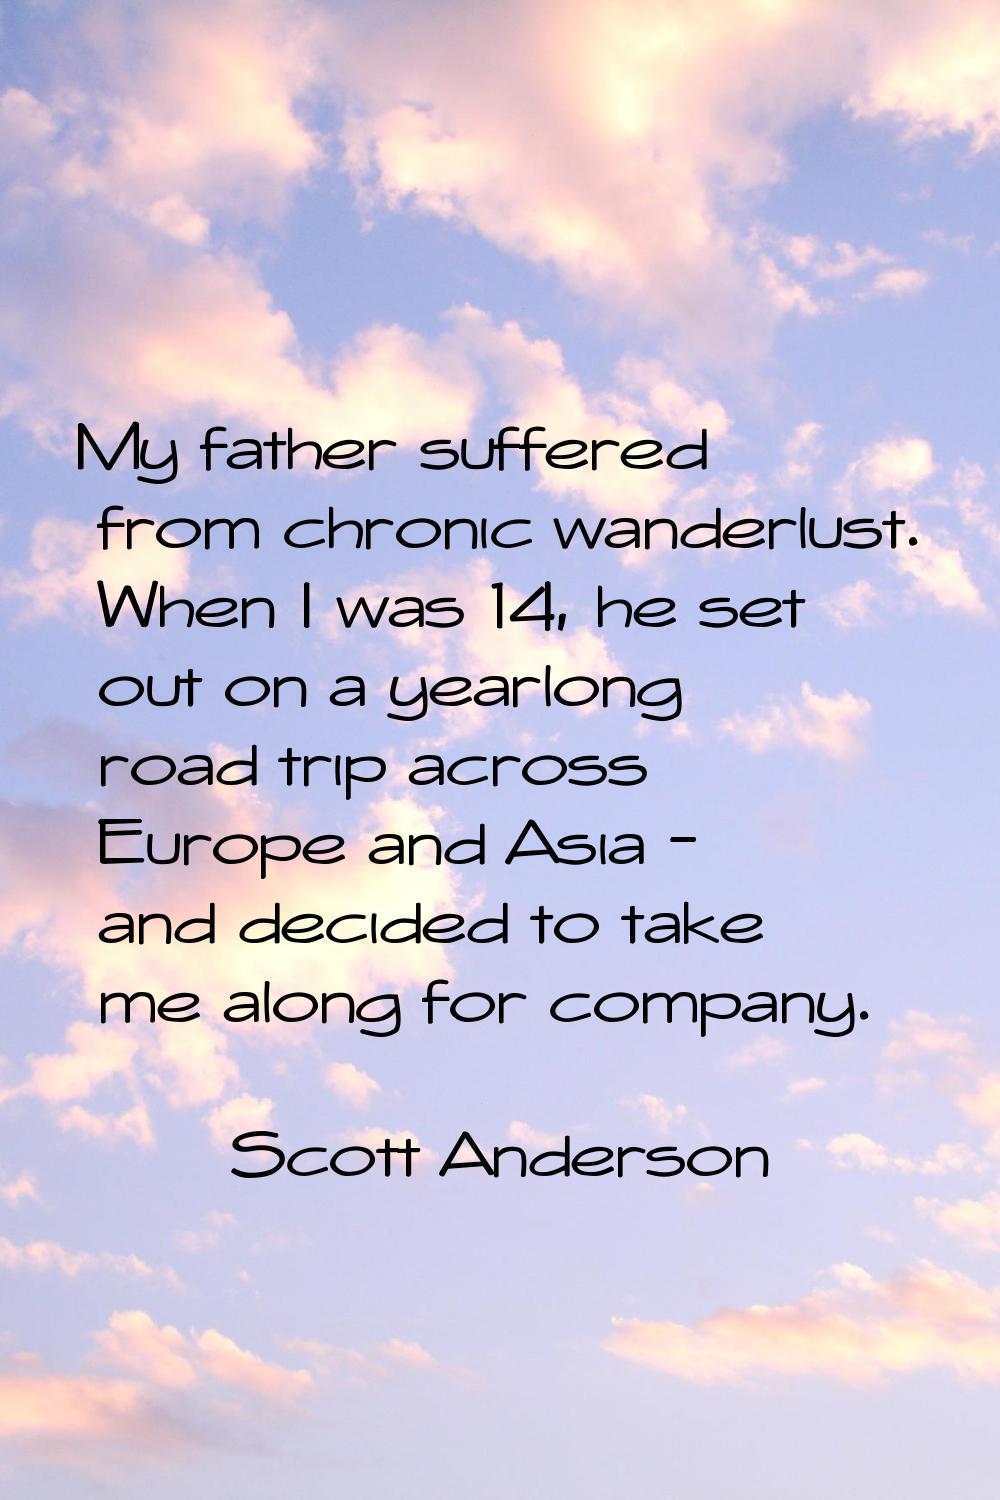 My father suffered from chronic wanderlust. When I was 14, he set out on a yearlong road trip acros